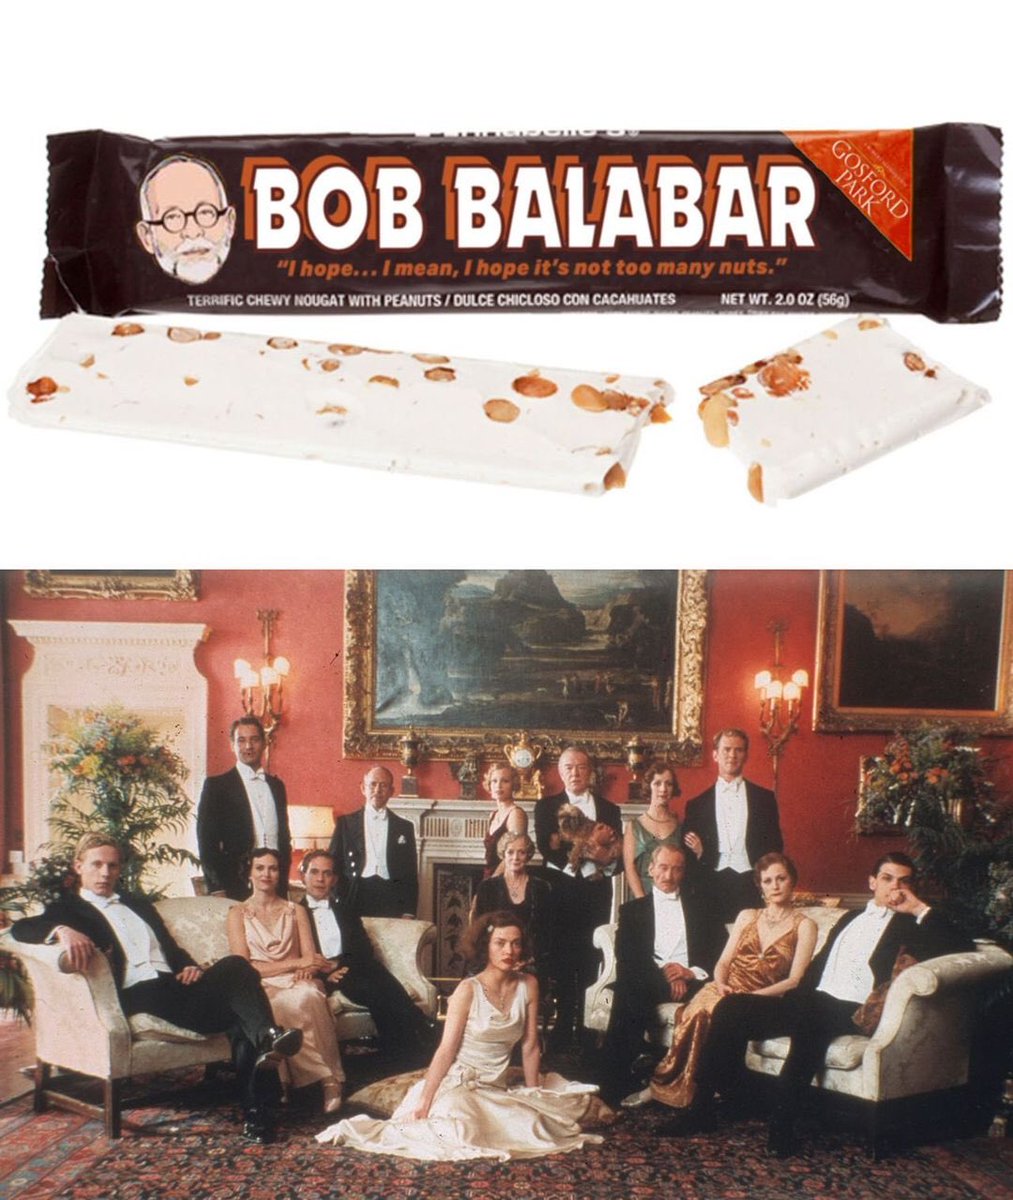 Thanks to the crazy talented person who invented the Balabar. ⁣Me and my other friends from Gosford Park wish you a delicious new year.⁣⁣